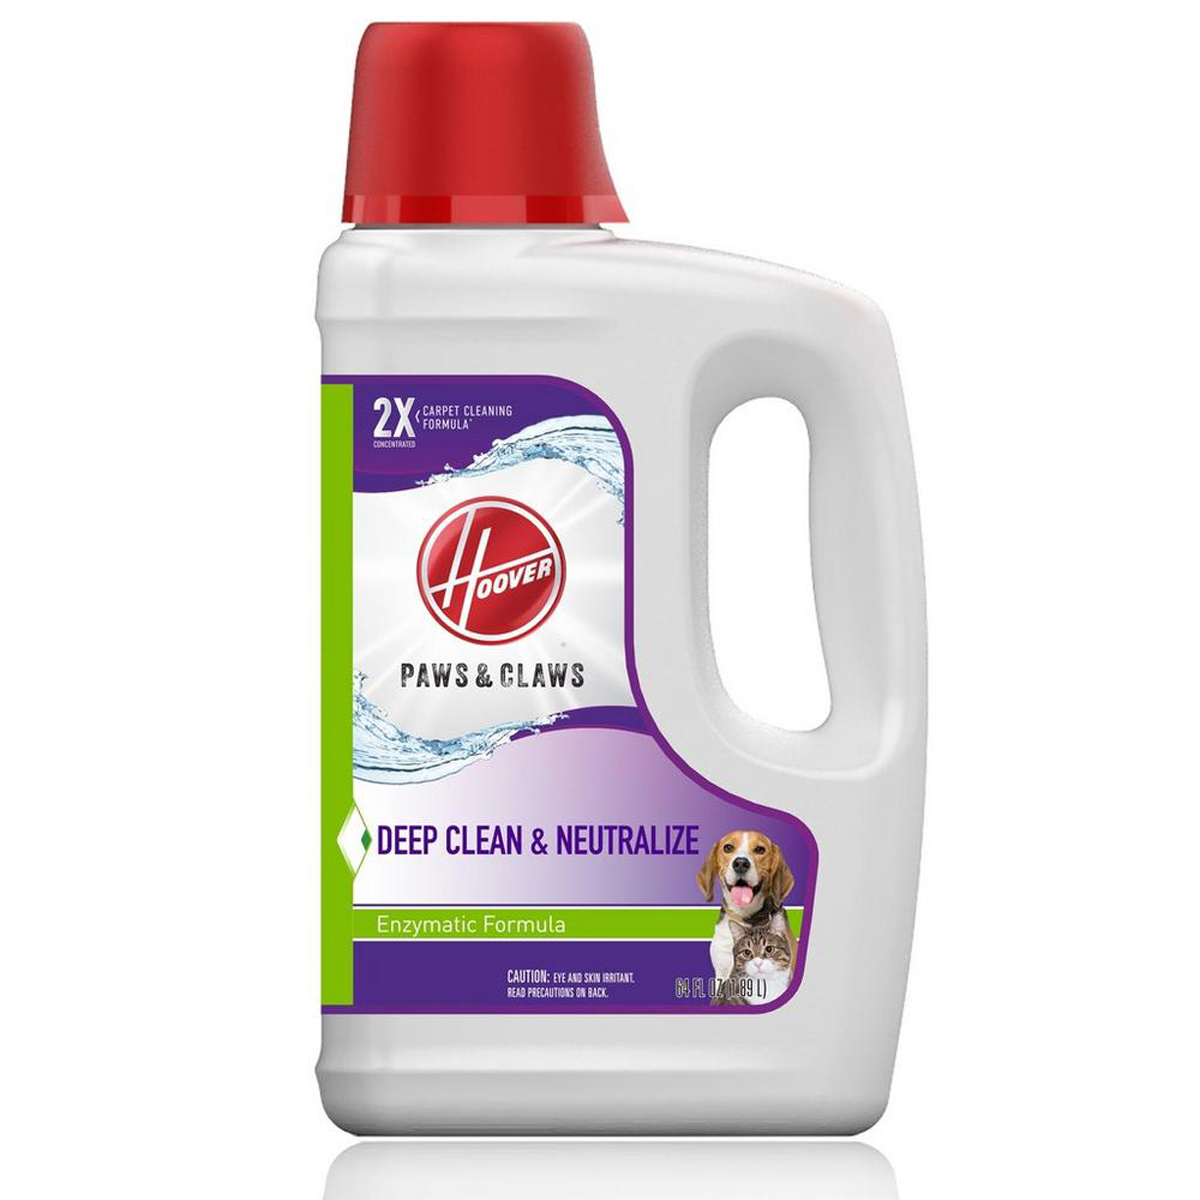 Hoover(R) 64oz. Paws And Claws 2X Concentrate Formula